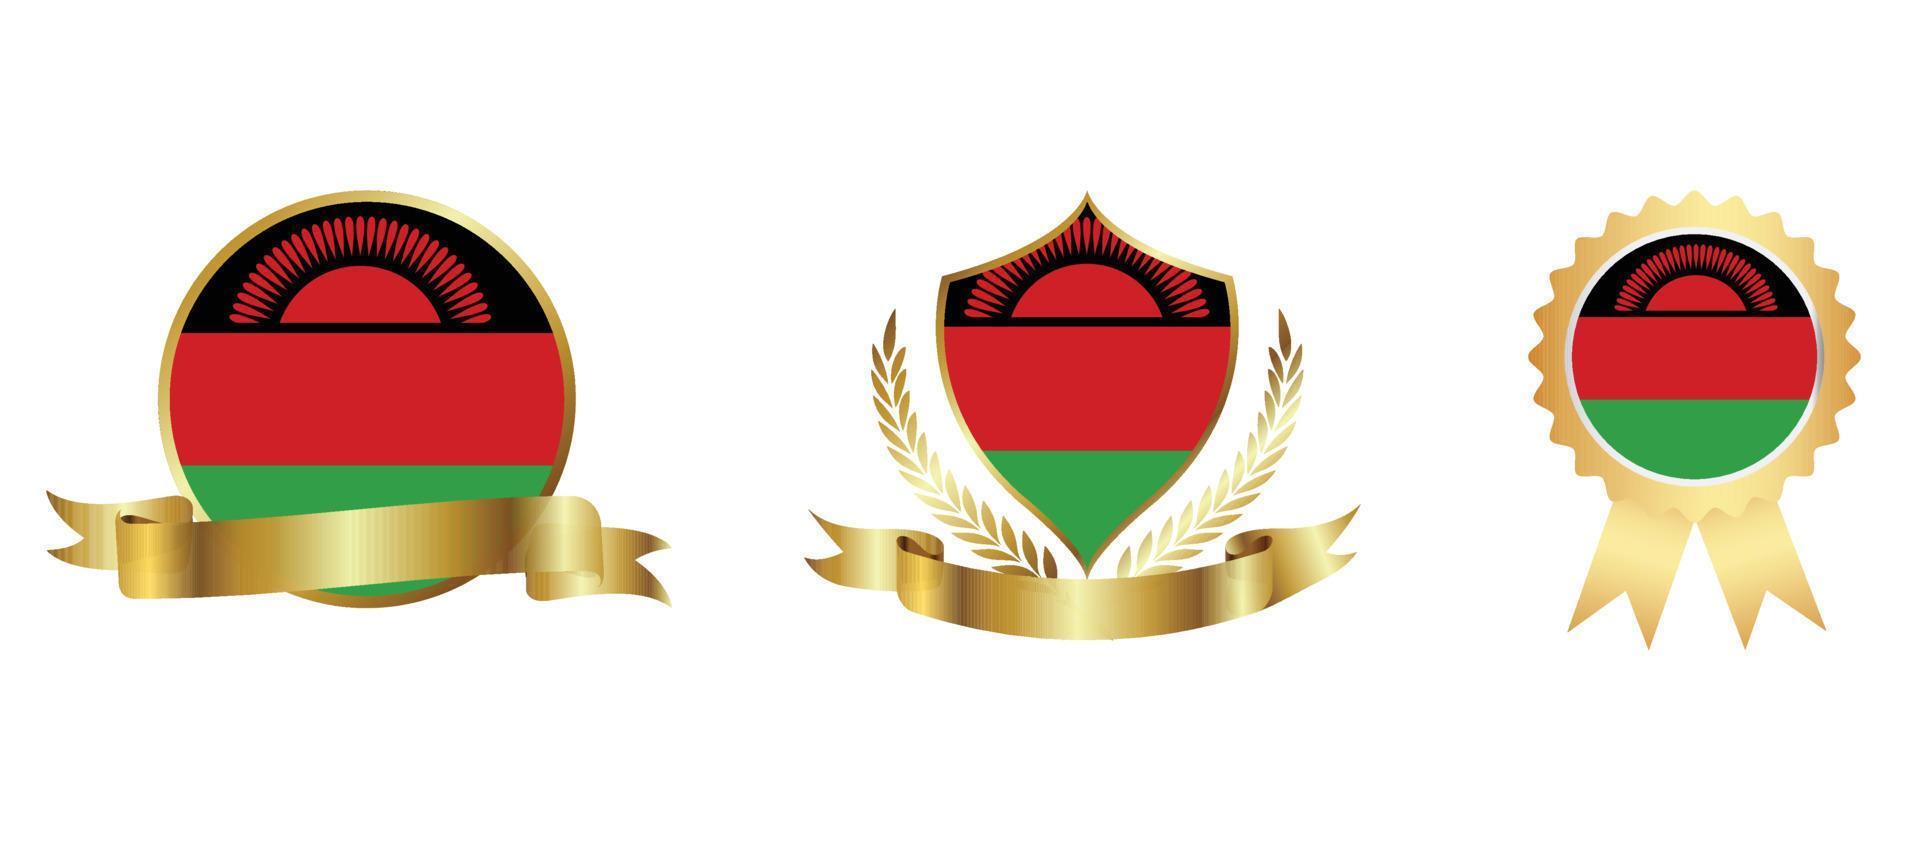 Malawi flag icon . web icon set . icons collection flat. Simple vector illustration.